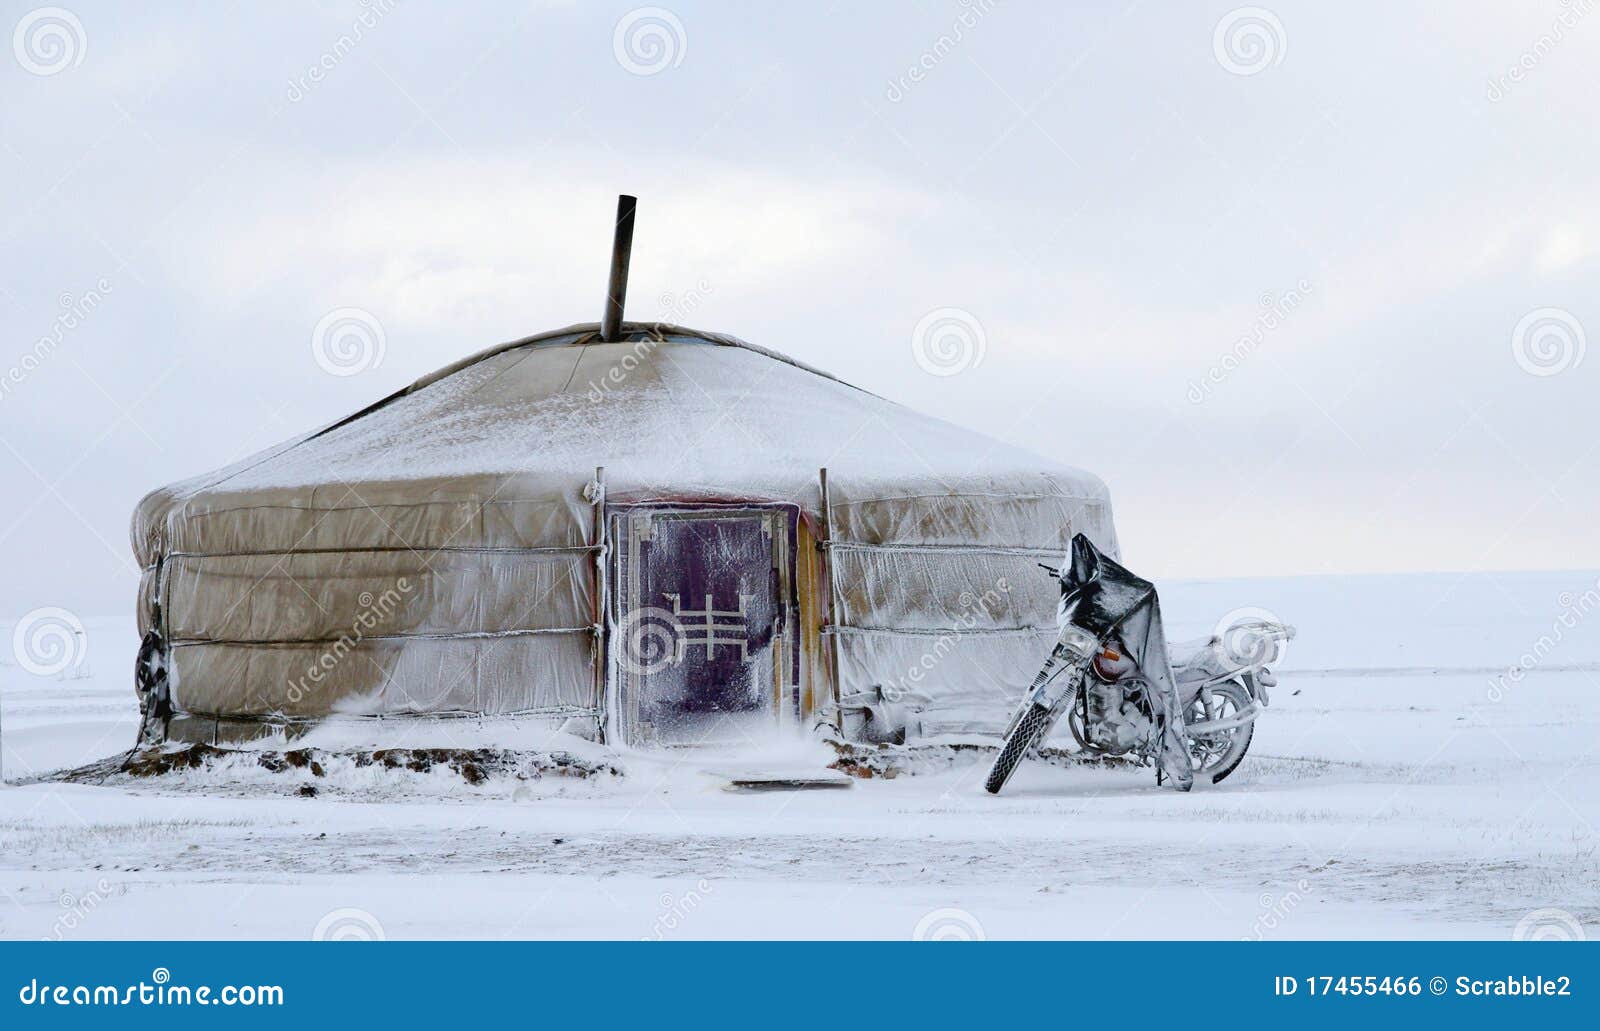 yurt in the snow with a motorcycle in mongolia